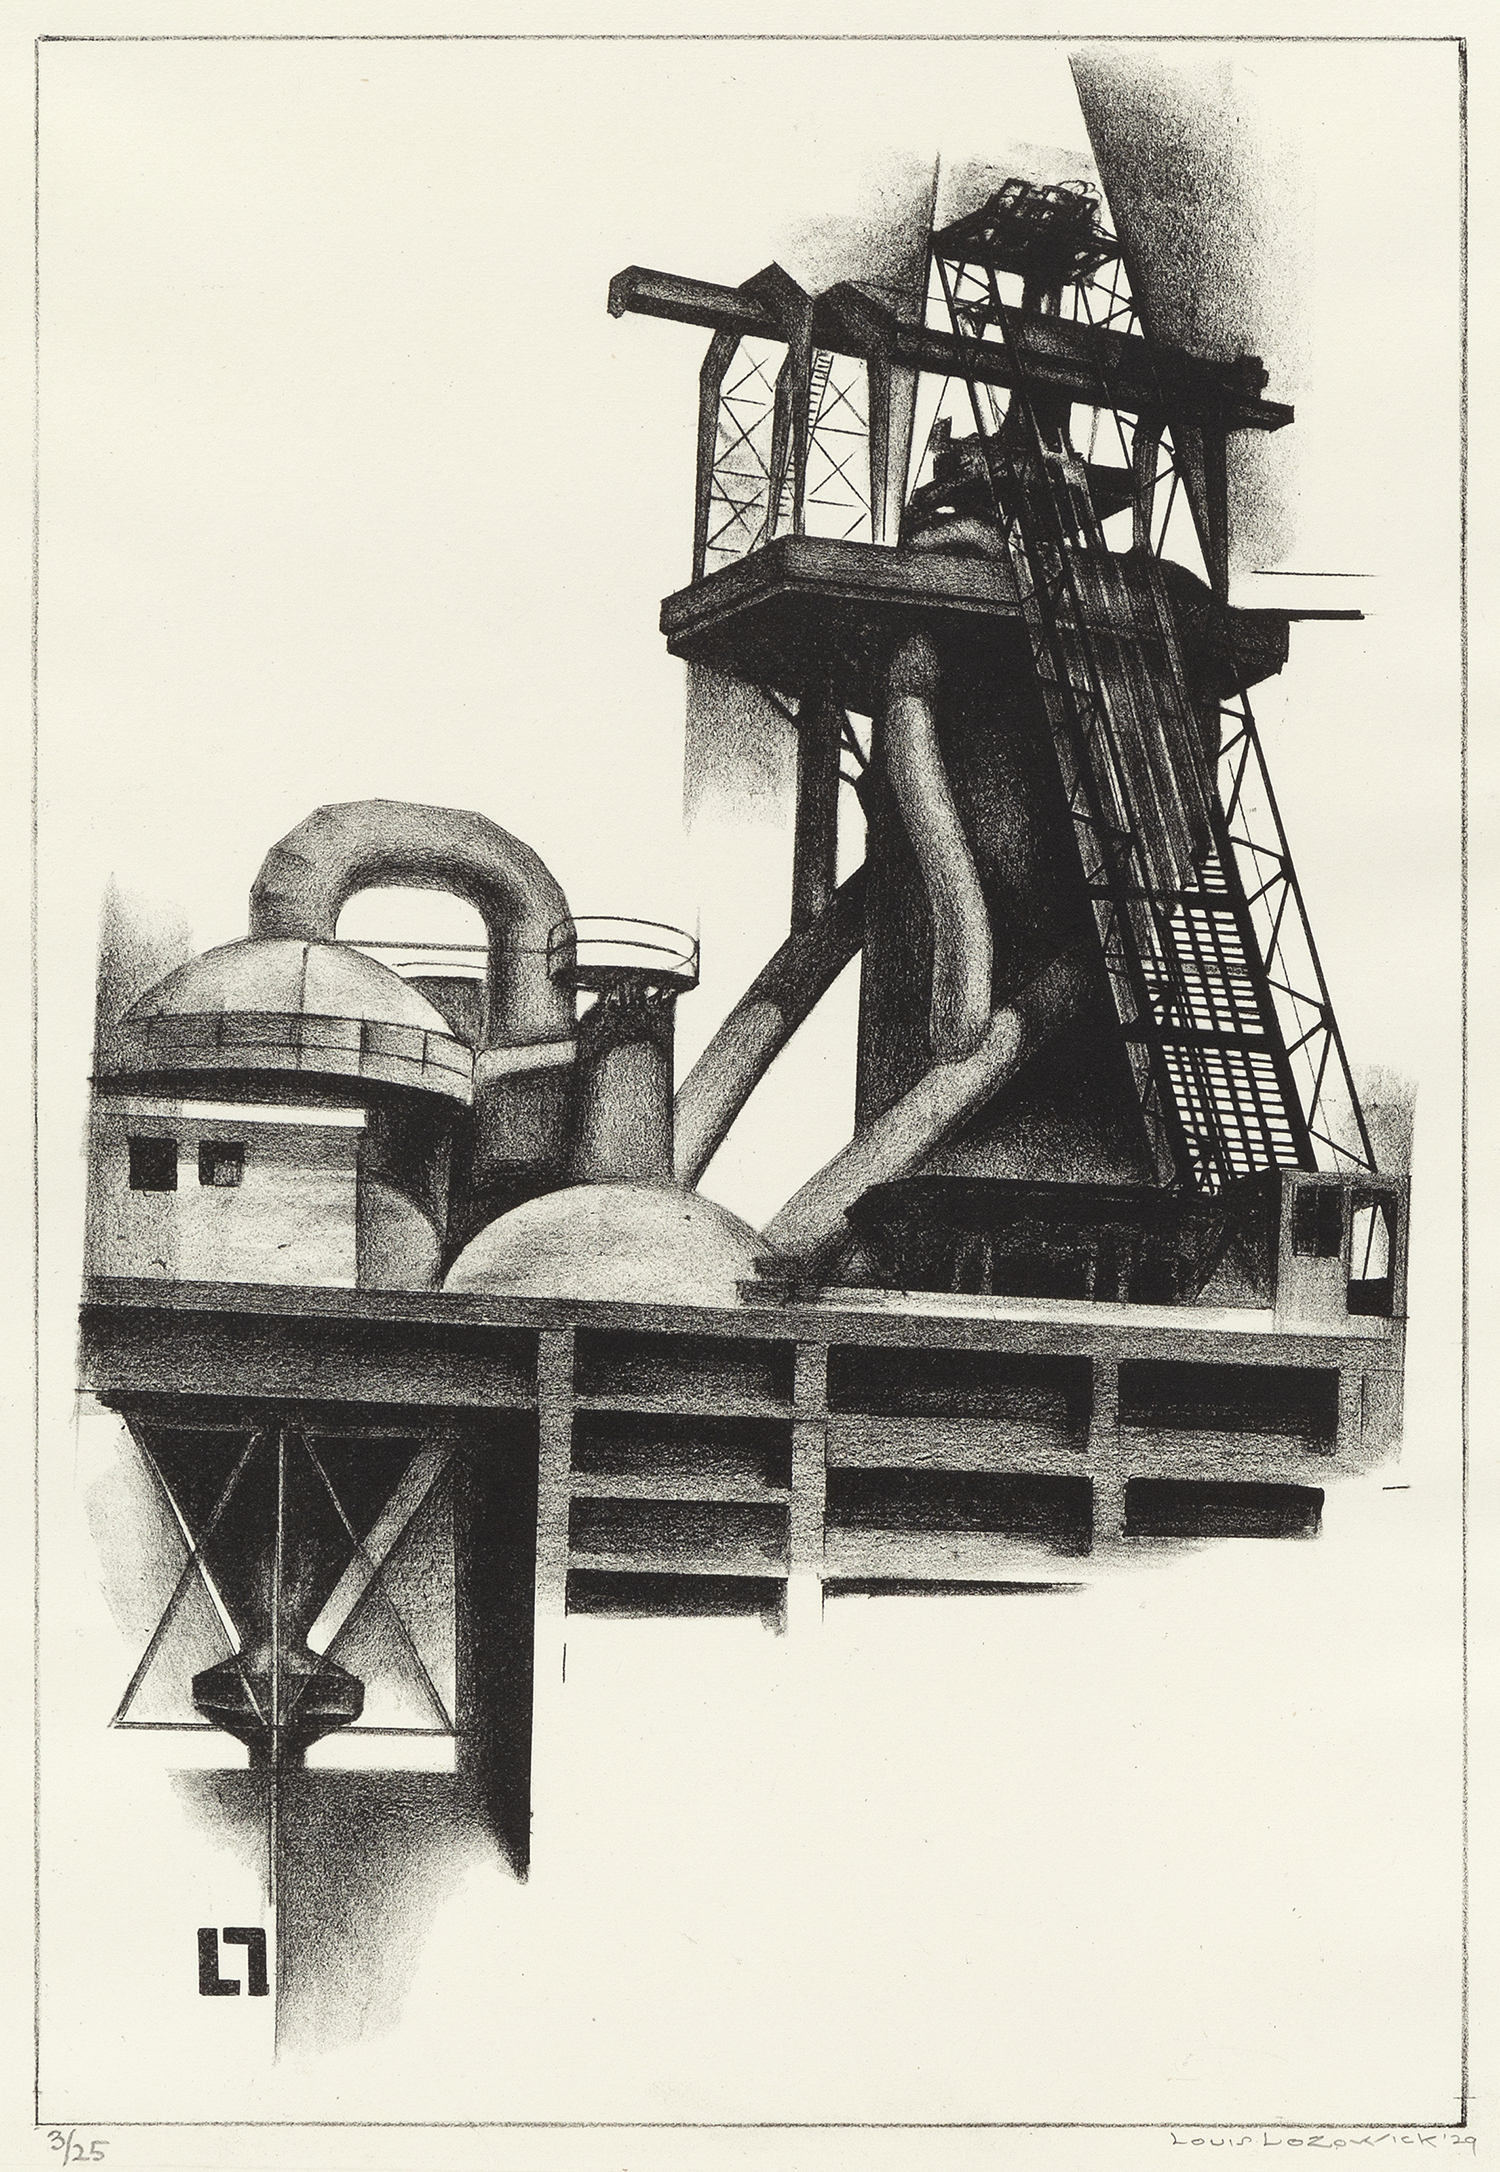 Corner of Steel Plant, 1929, Lithograph, 11 3/8 x 7 13/16 inches (28.9 x 19.8 cm), Edition of 25